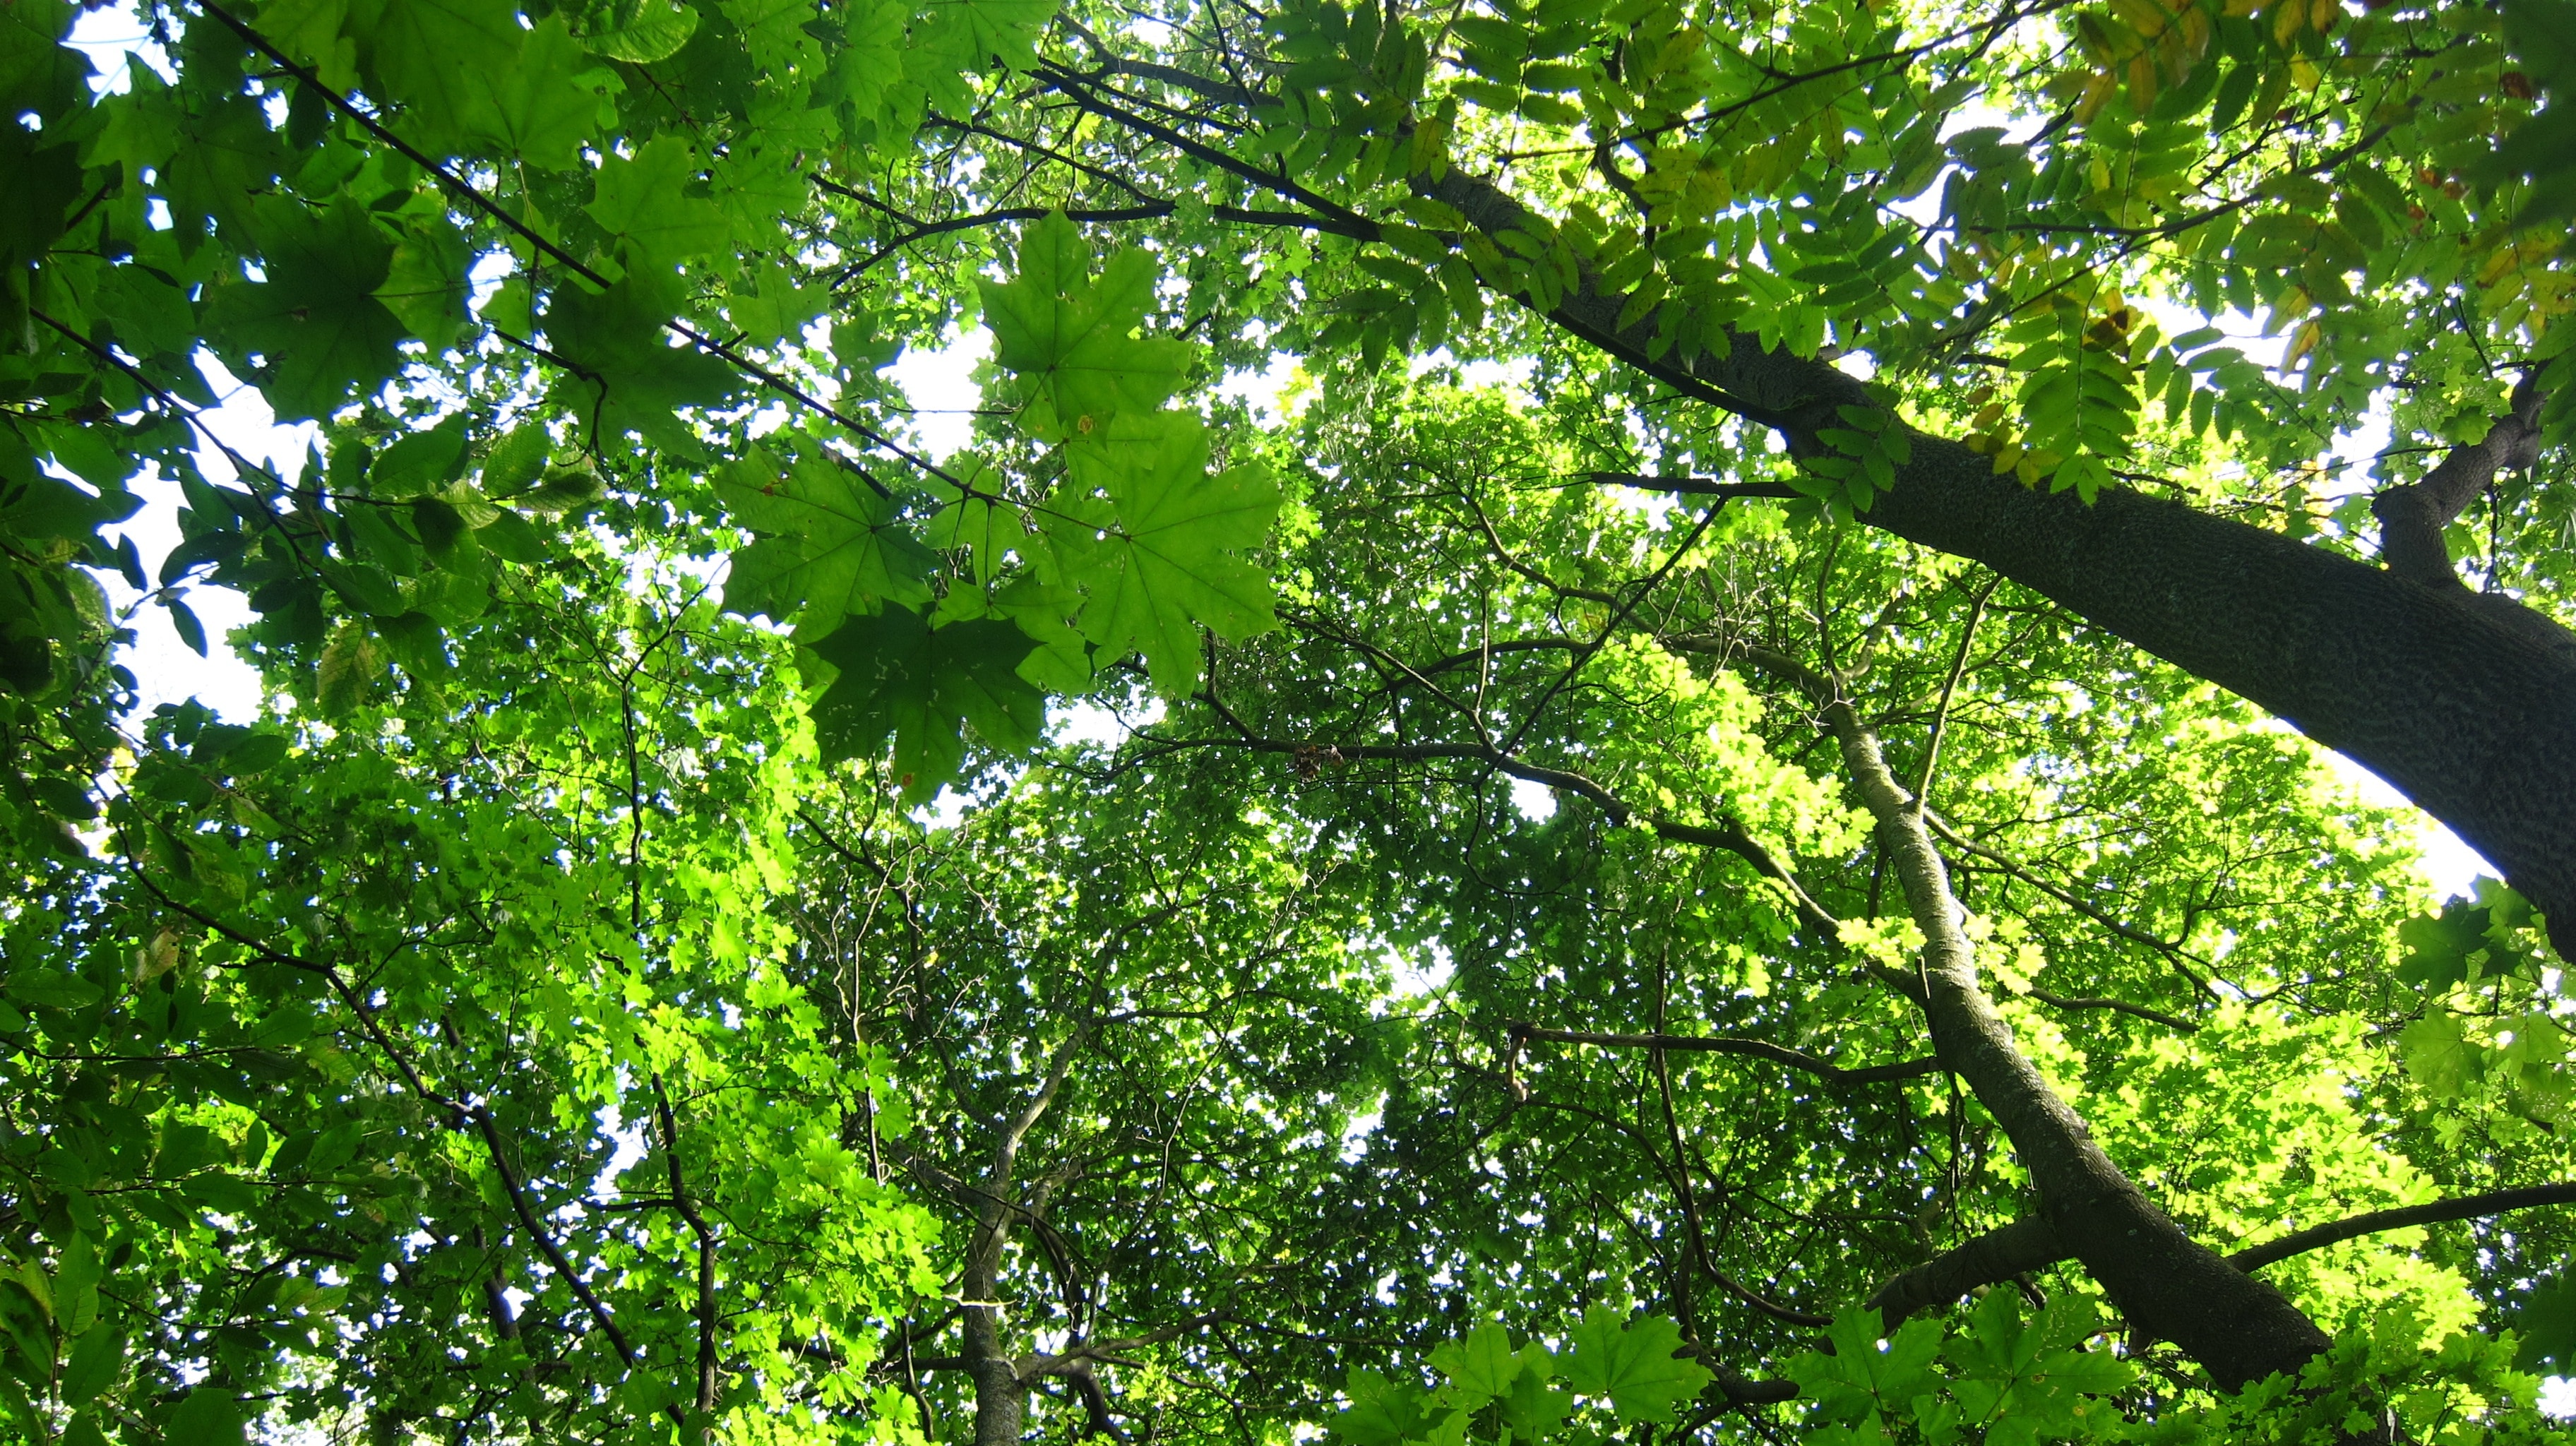 worm's eyeview of green leaf tree